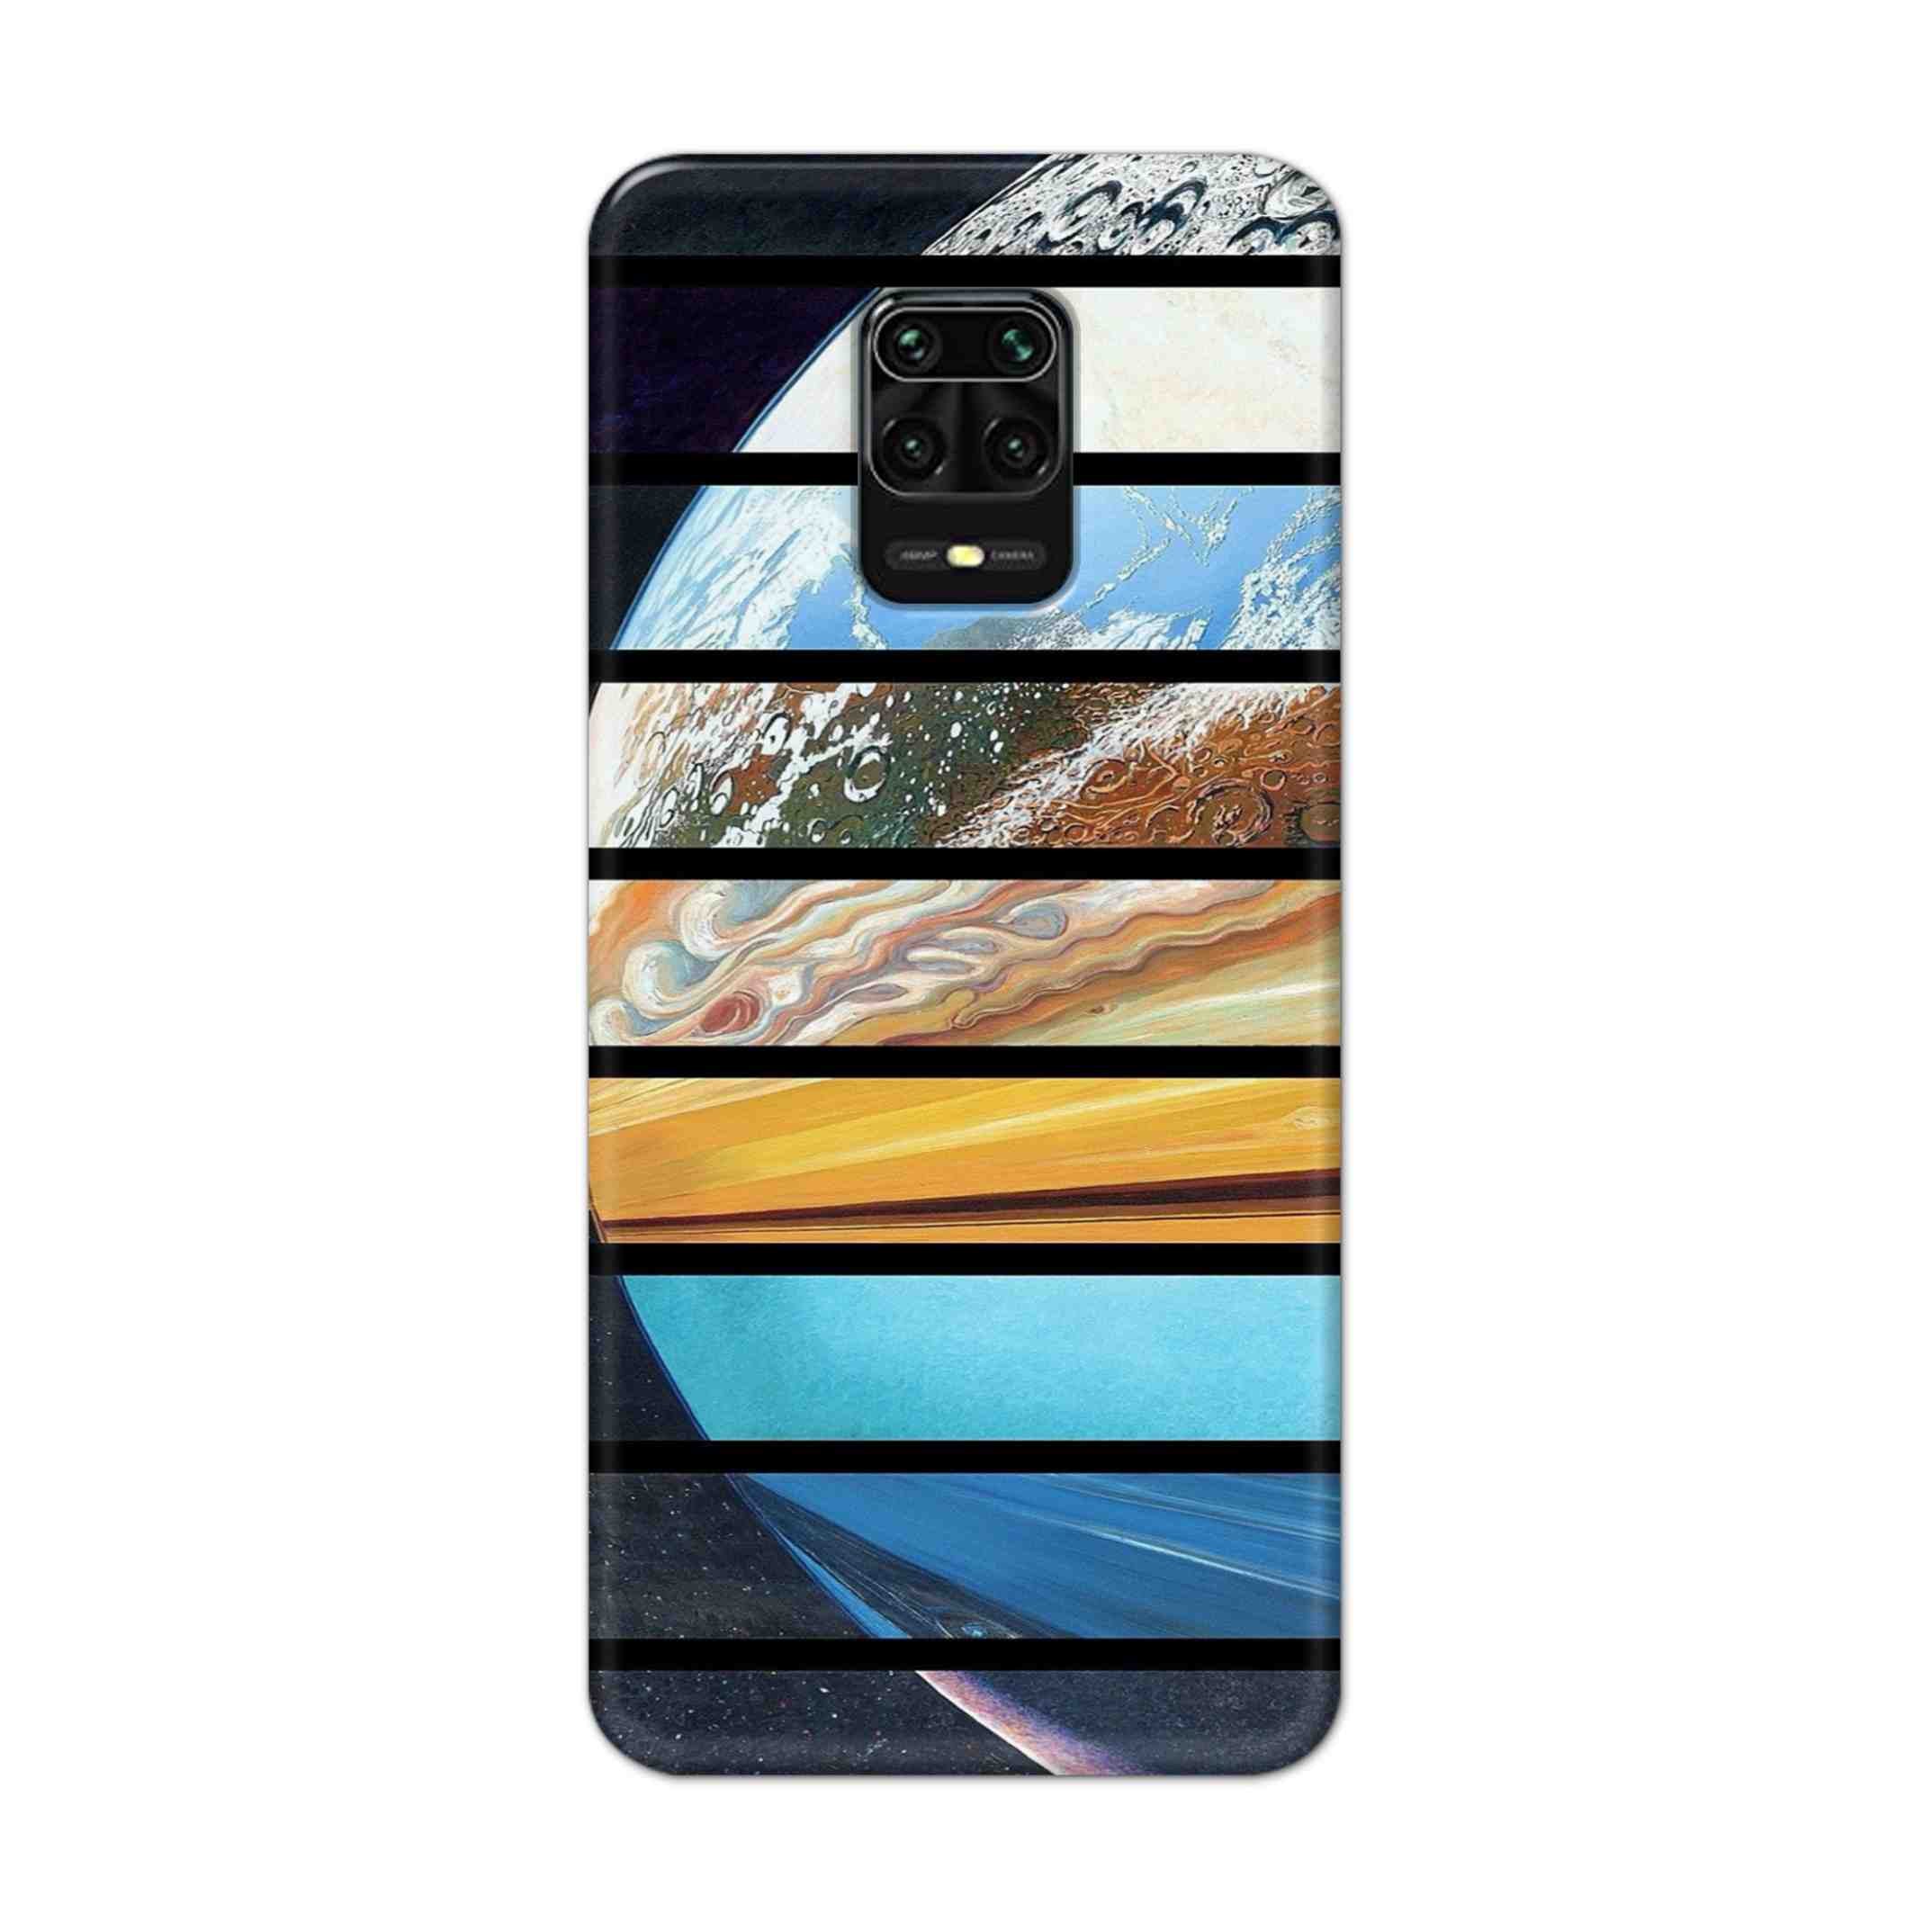 Buy Colourful Earth Hard Back Mobile Phone Case Cover For Redmi Note 9 Pro Online